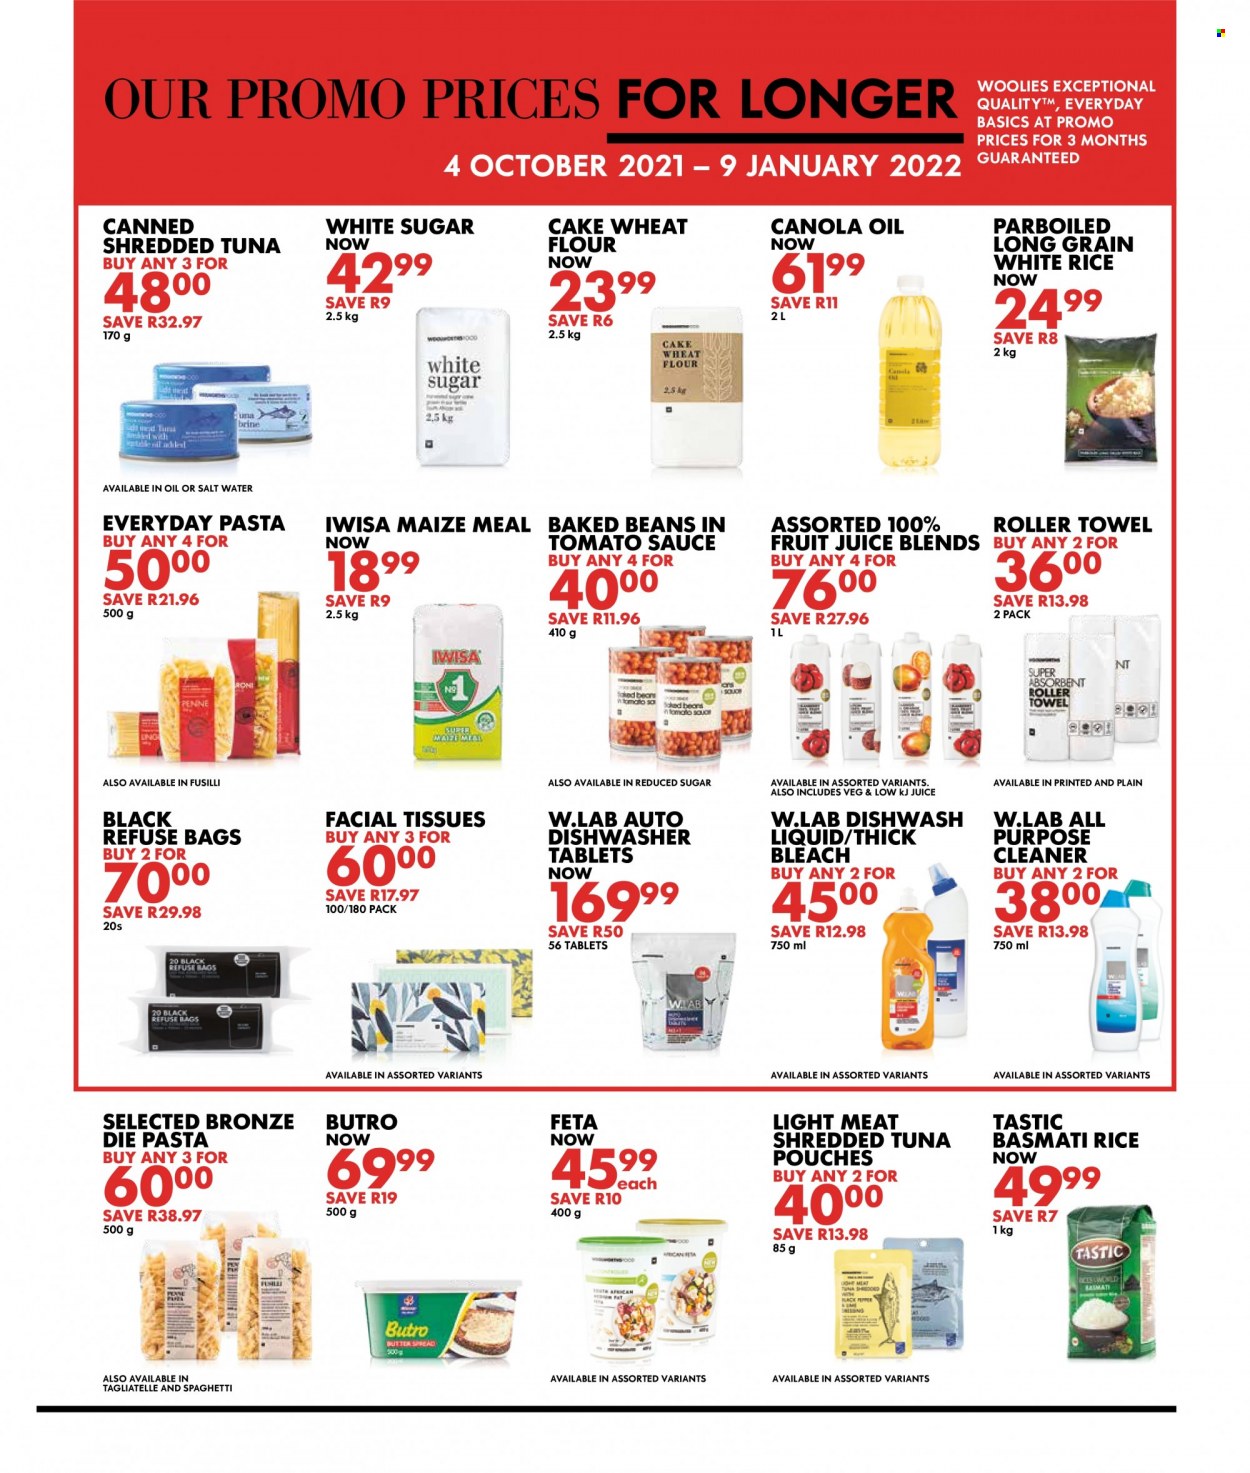 Woolworths specials - 12.06.2021 - 12.19.2021. 